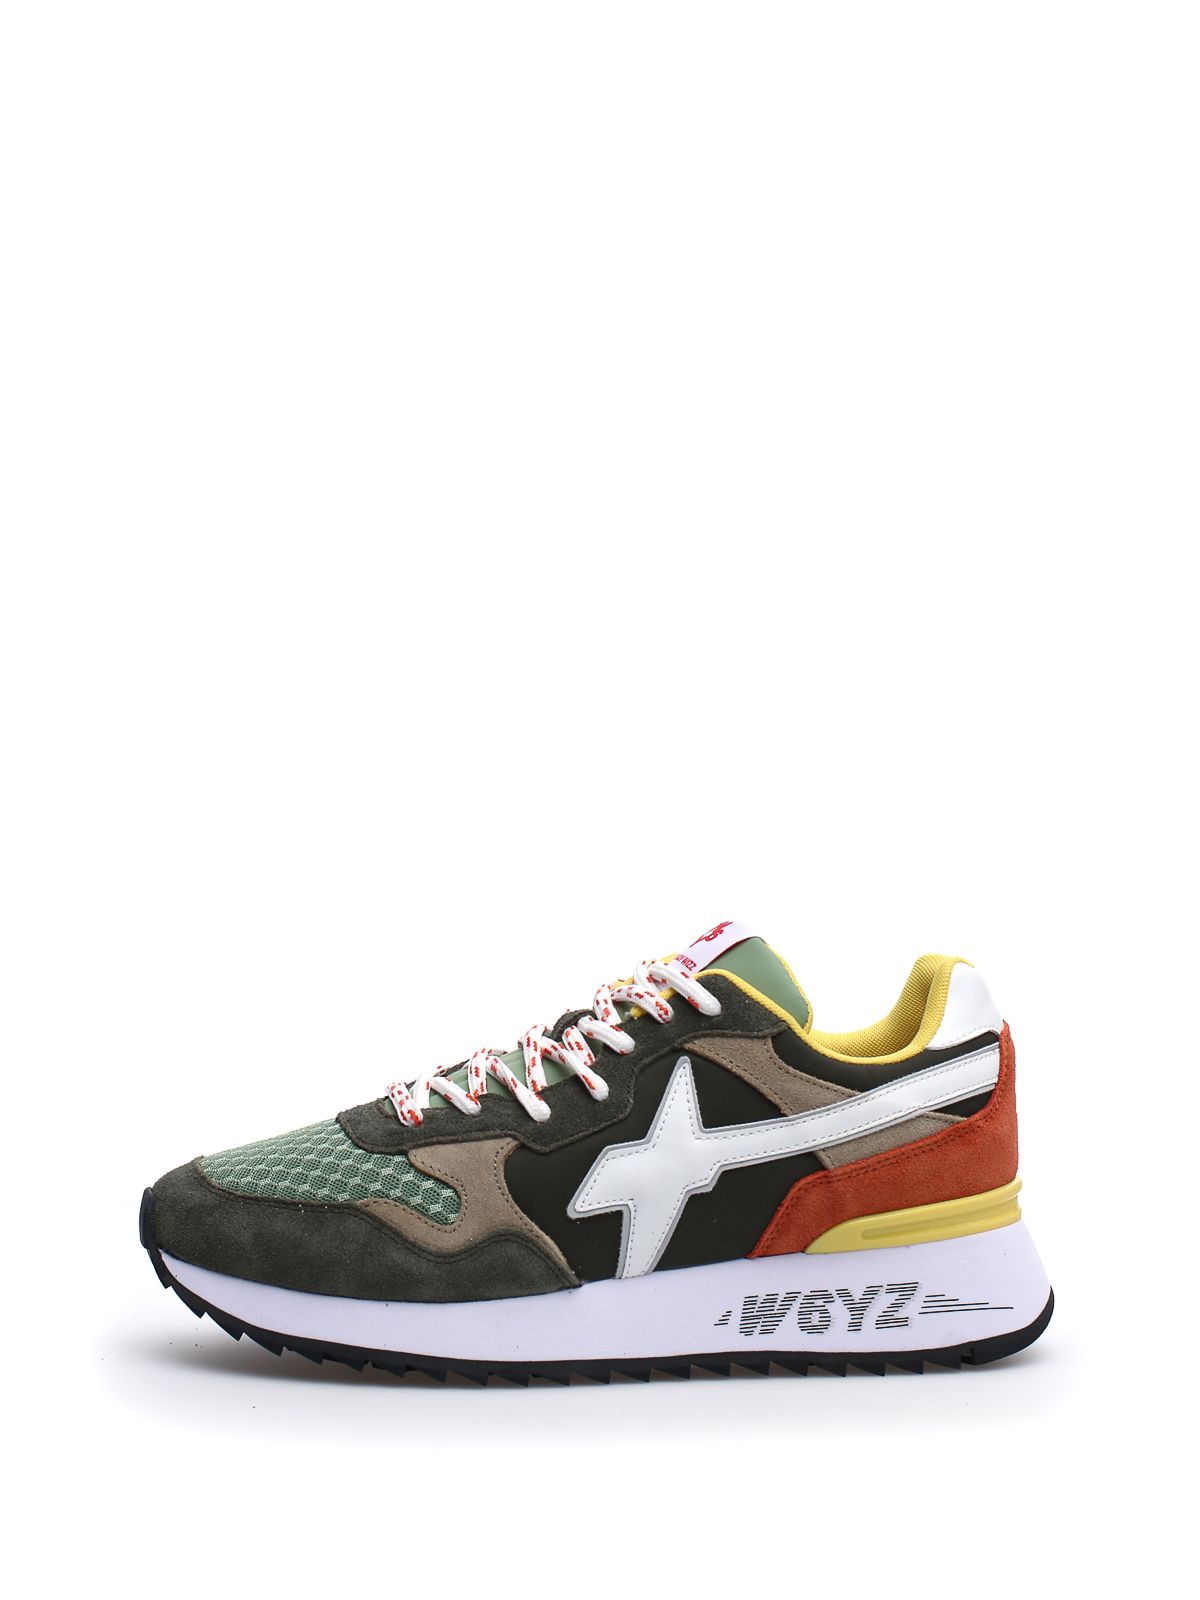 Trainers W6YZ - Yak m - 2015185152F39SOLE | Shop online at THEBS